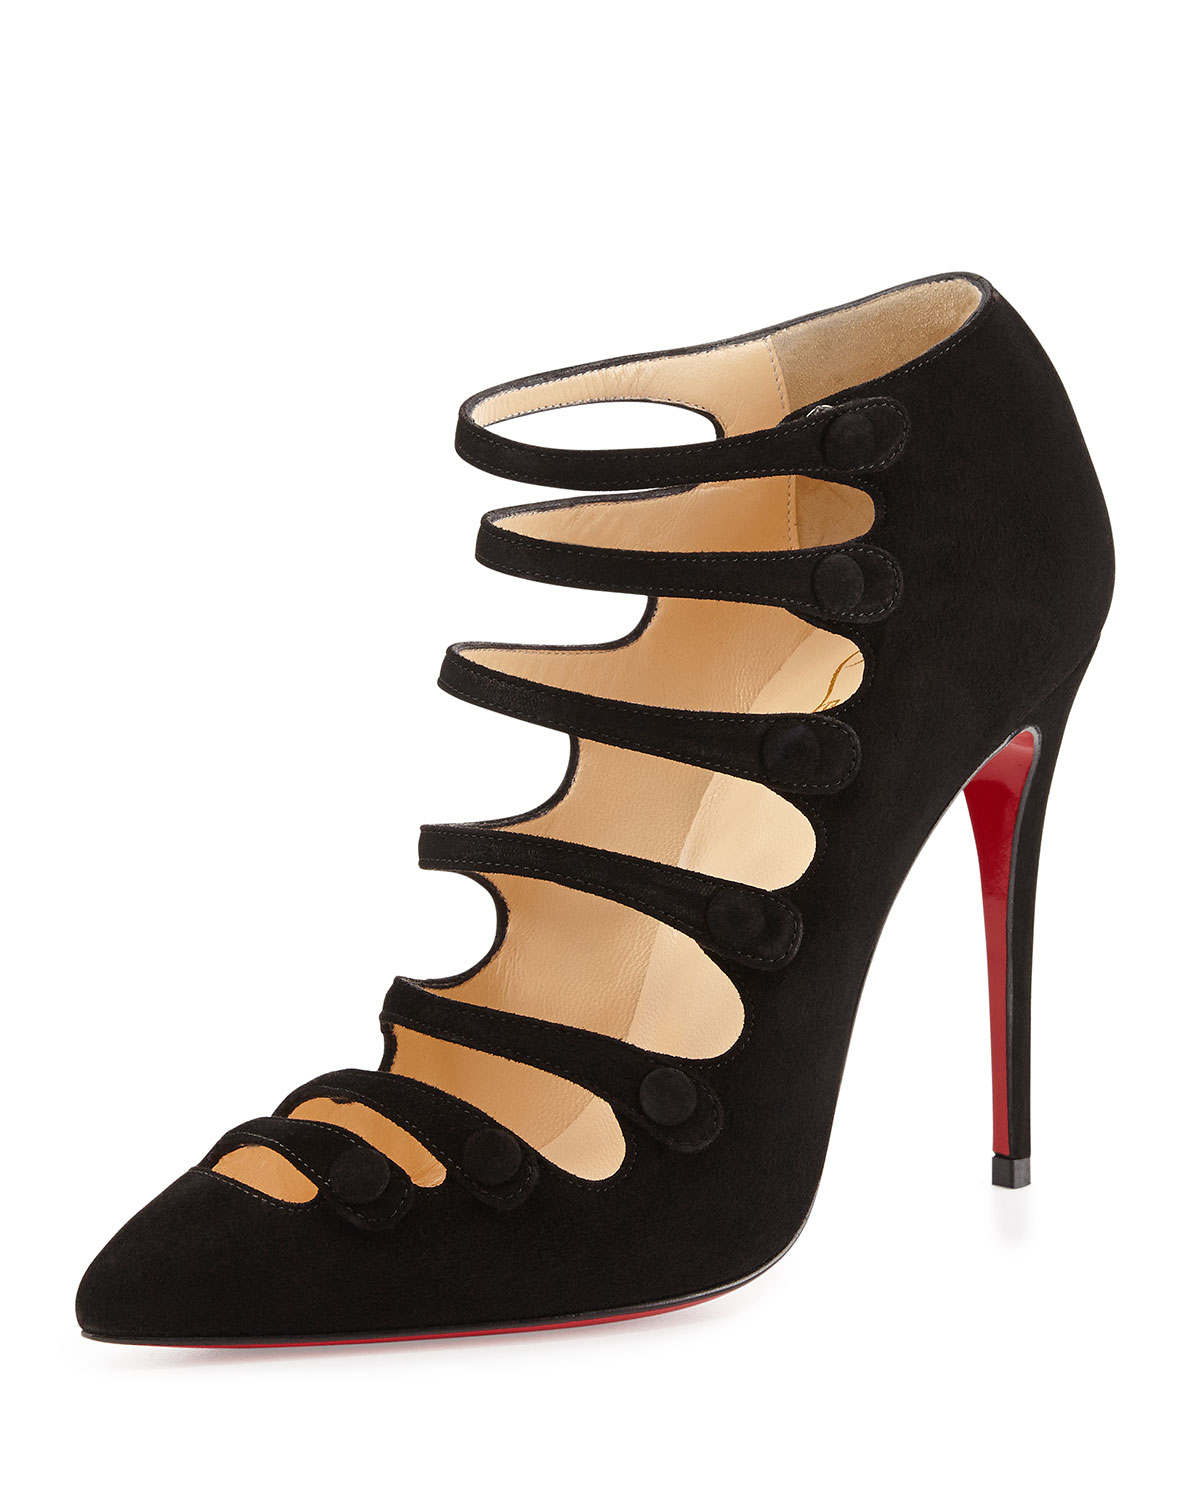 louis vuitton shoes fake - Christian louboutin Viennana Suede Red Sole Bootie in Black | Lyst